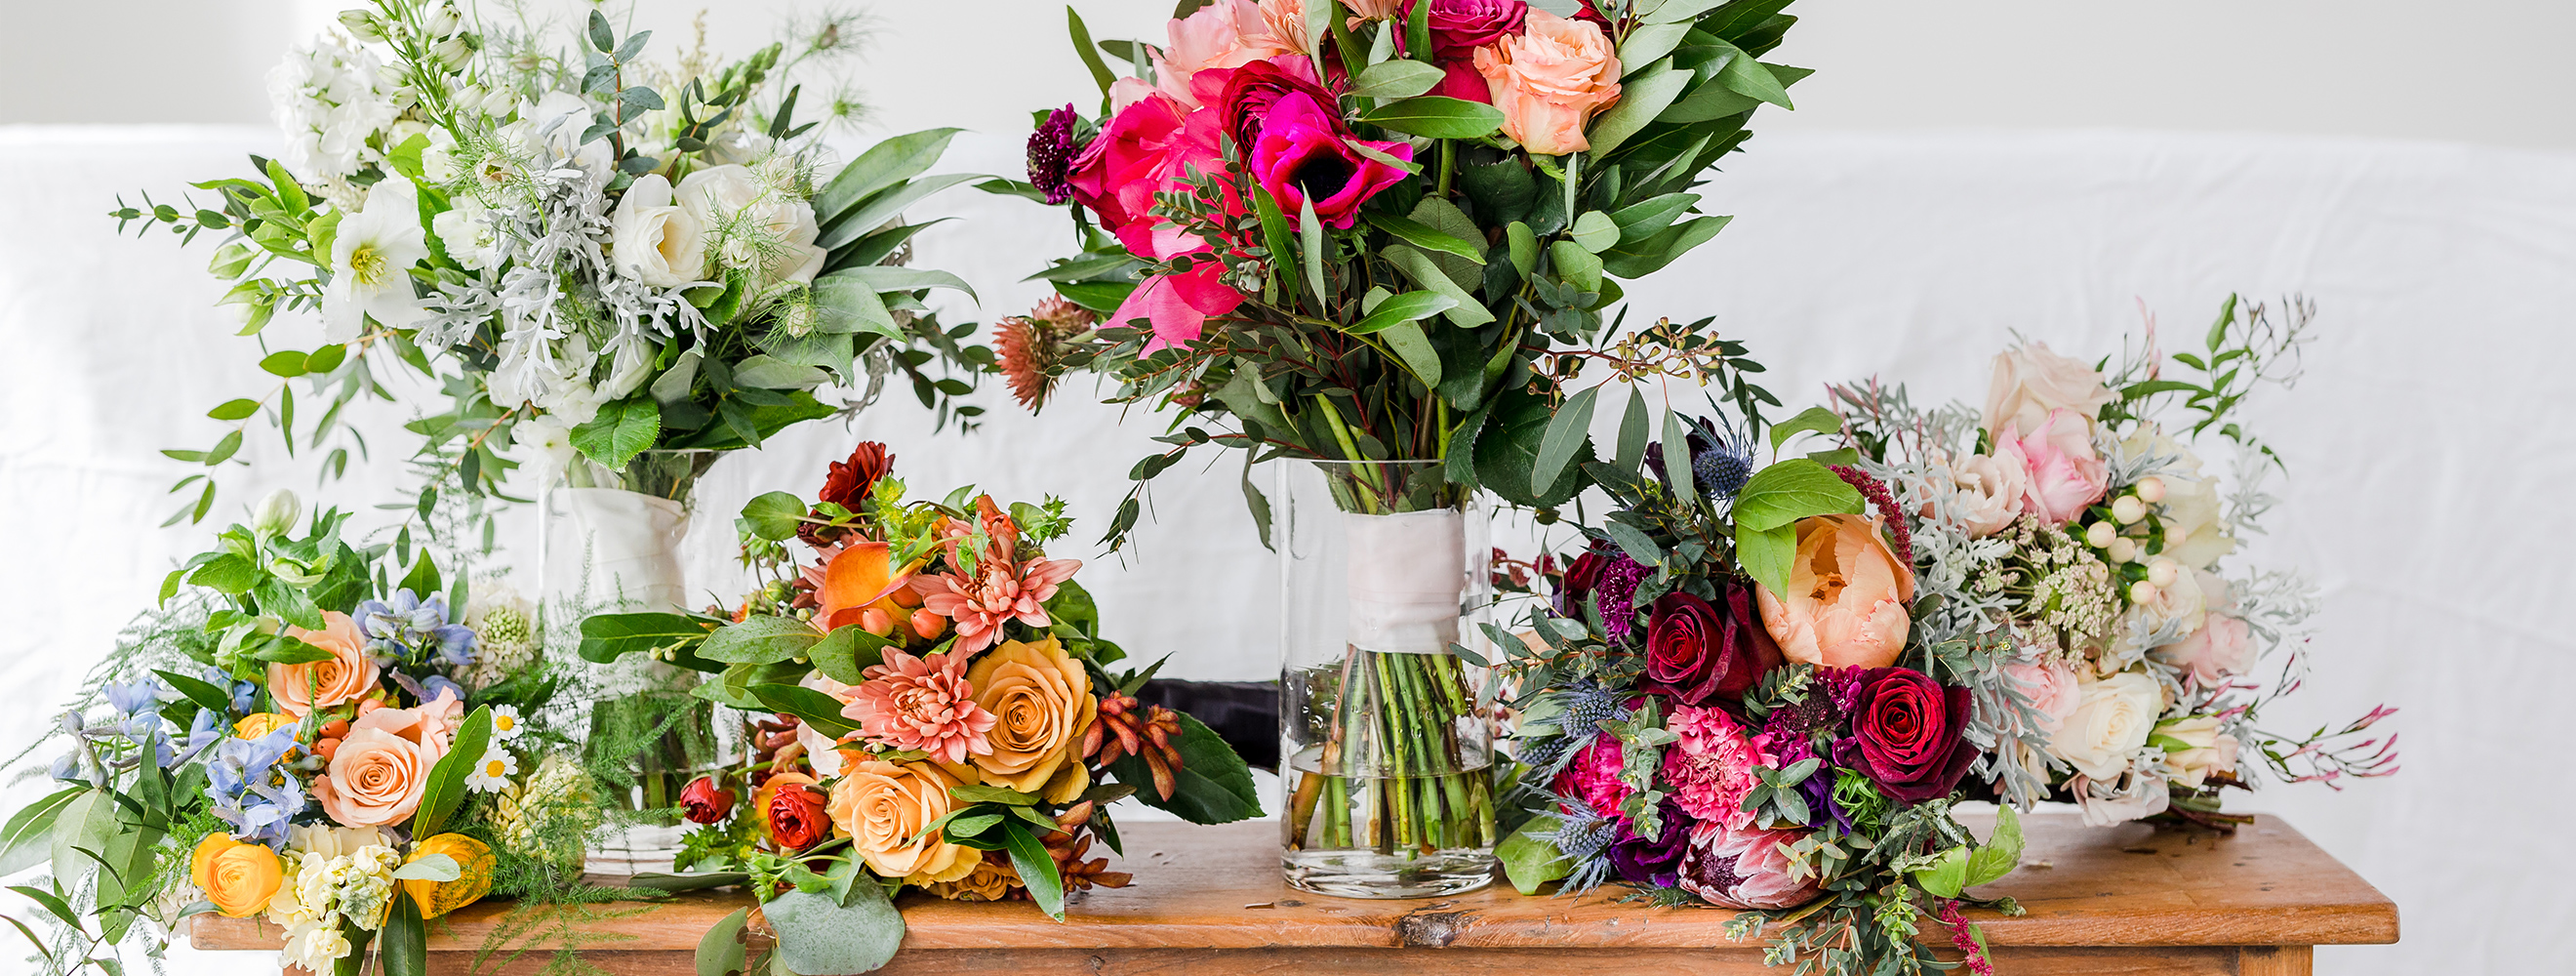 Five wedding bouquets of colorful flowers sit atop a wooden table.